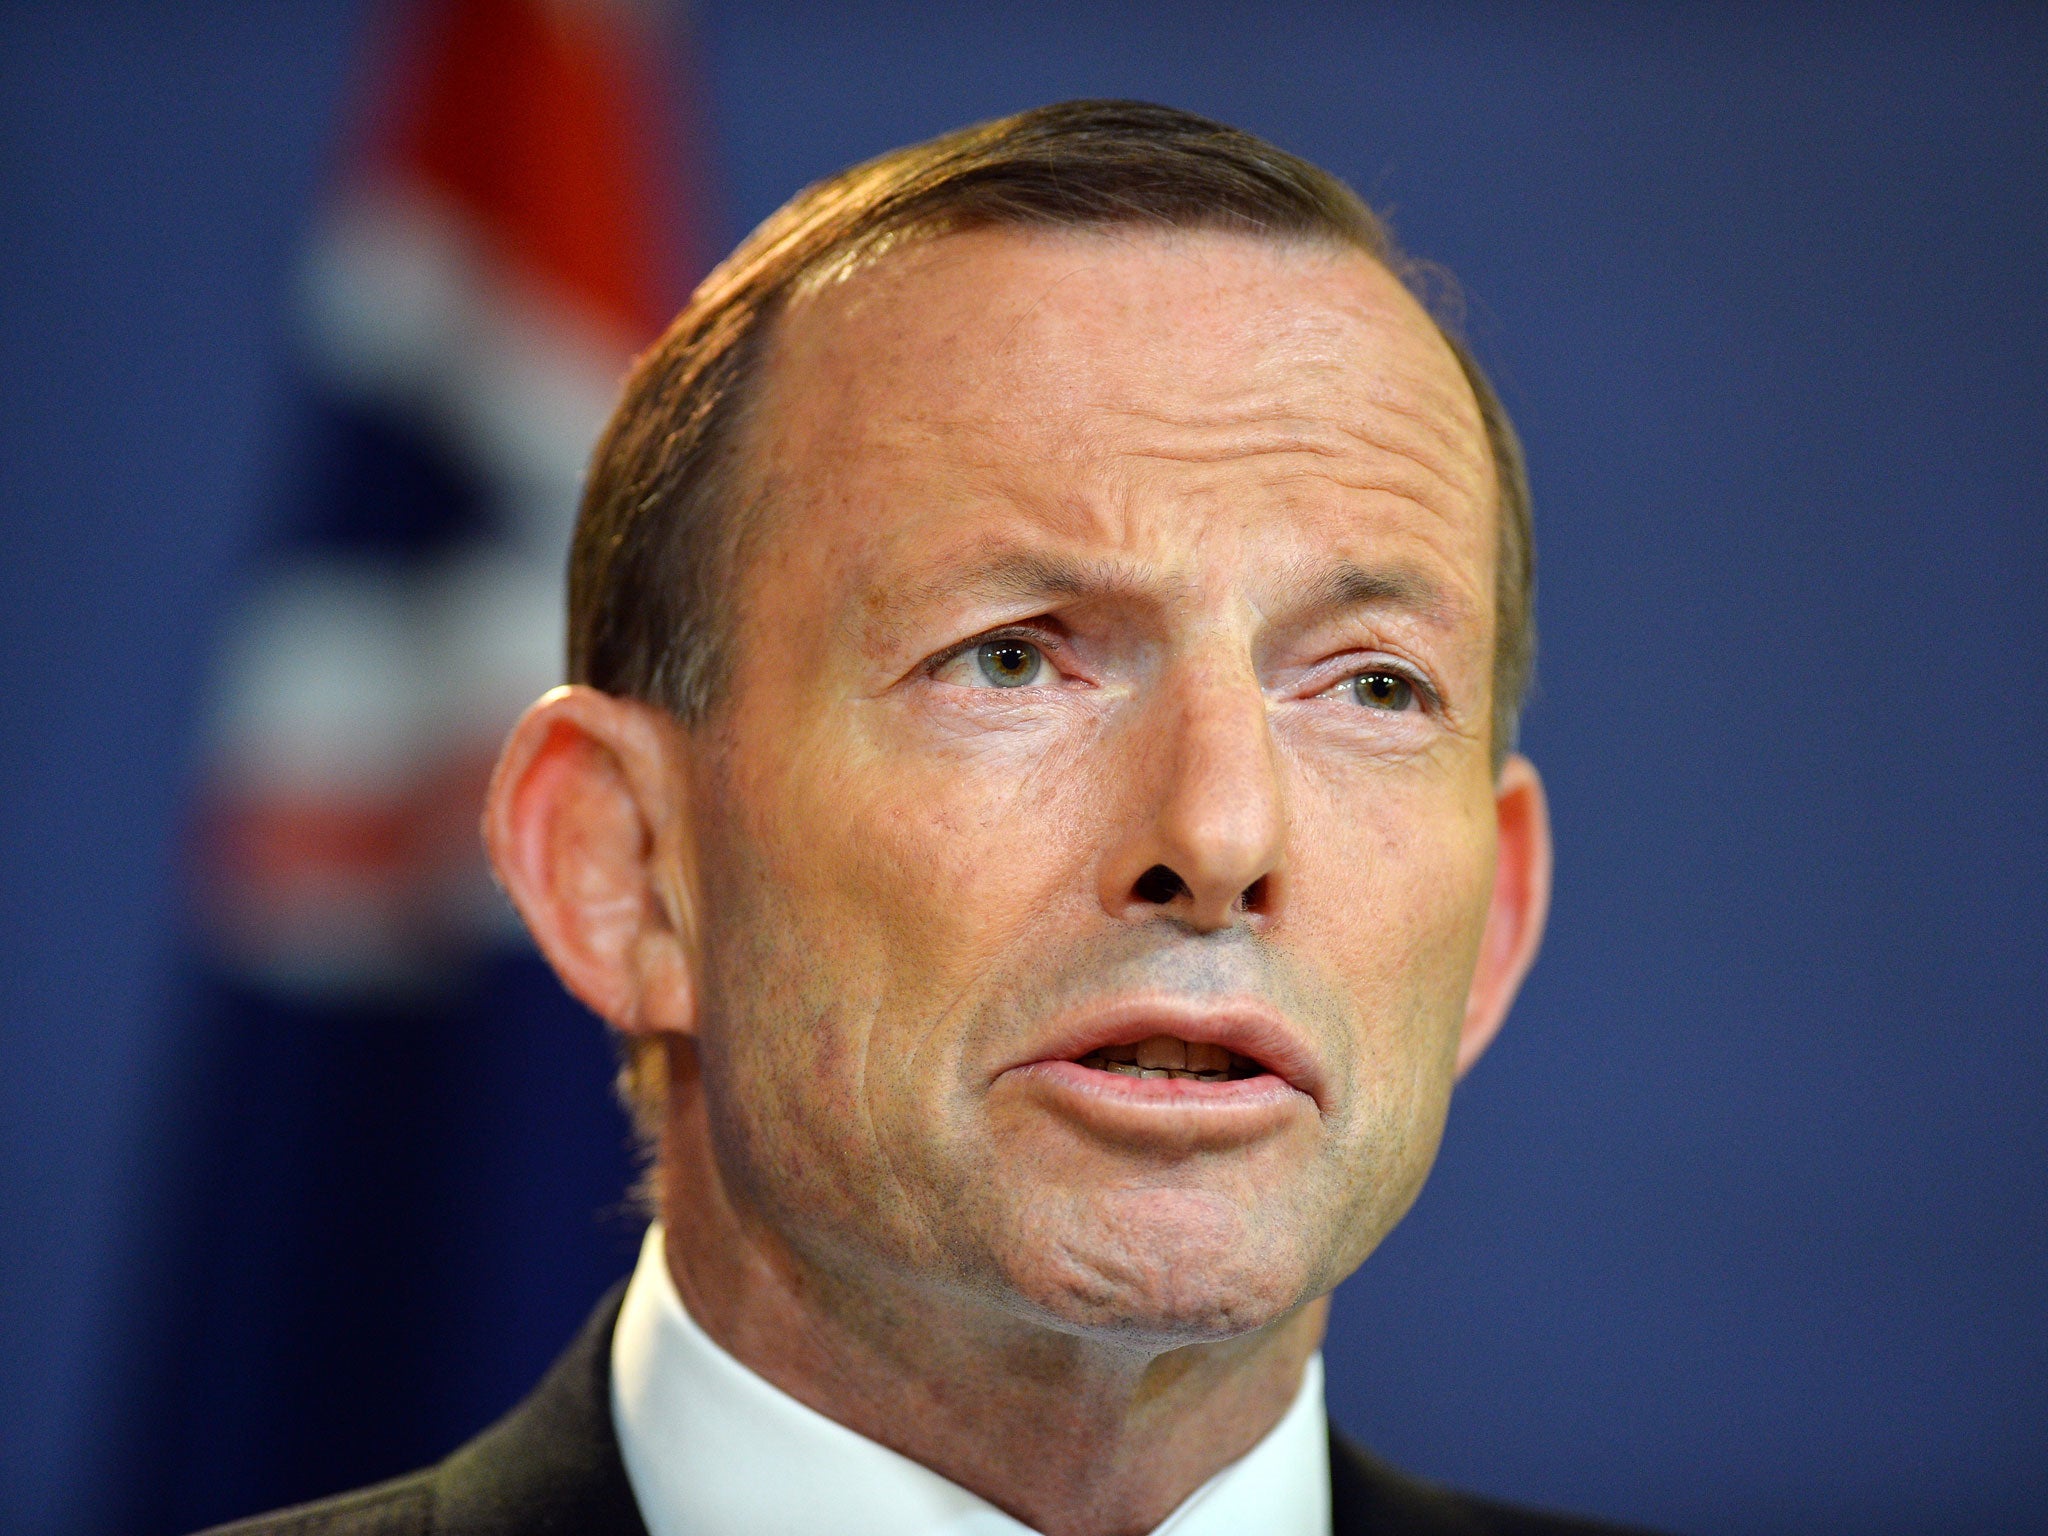 Australian Prime Minister Tony Abbott had his entire YouTube account suspended after users flagged a video as inappropriate.